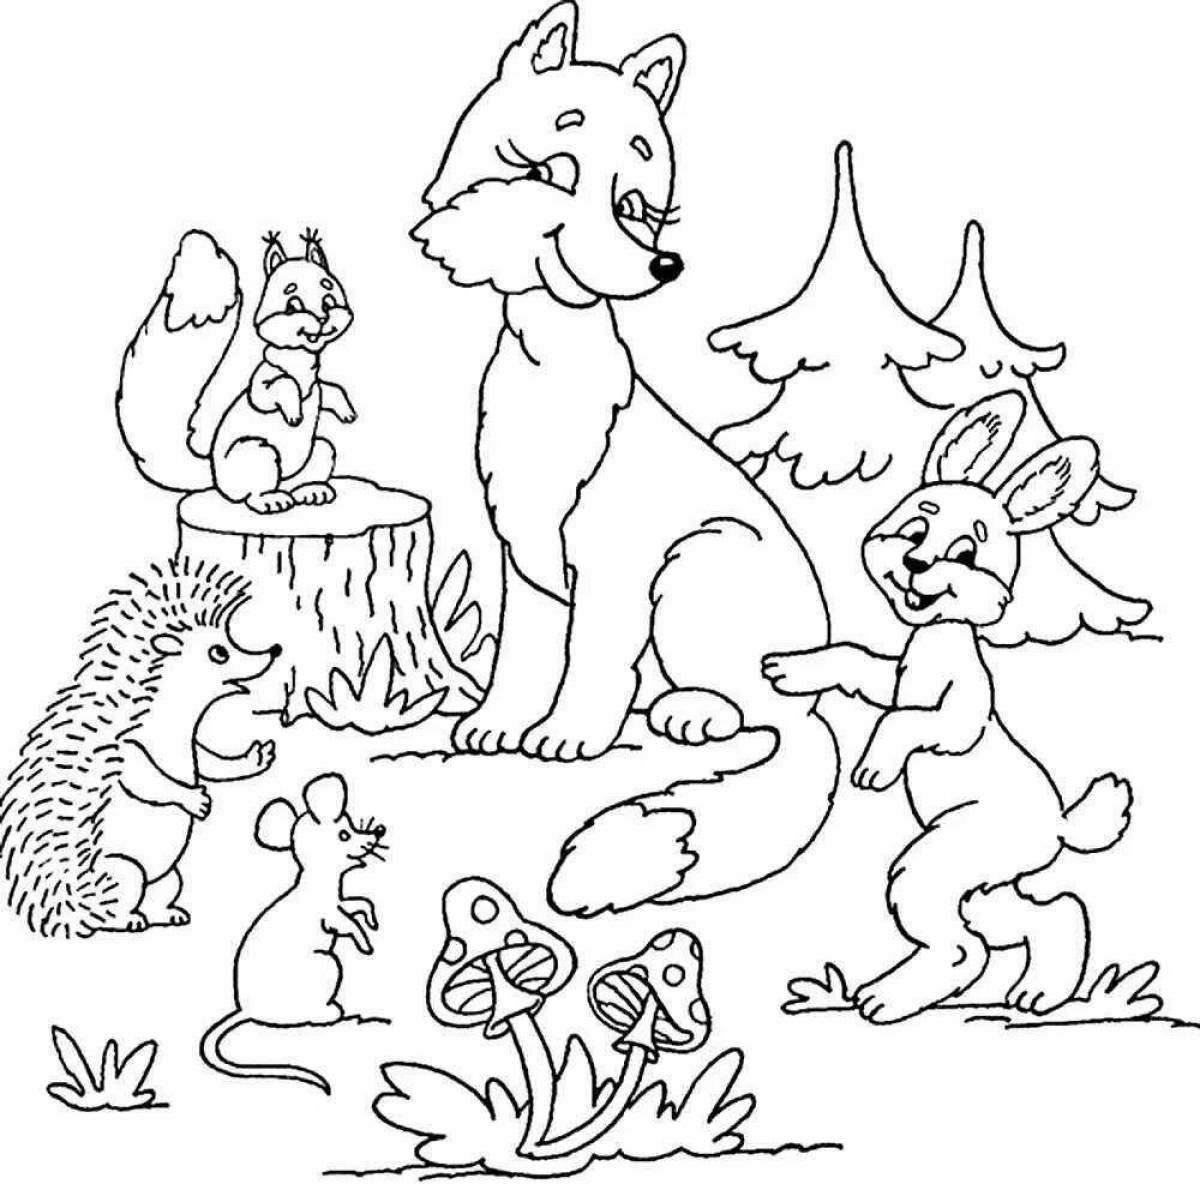 Funny animal coloring pages for kids 5-6 years old